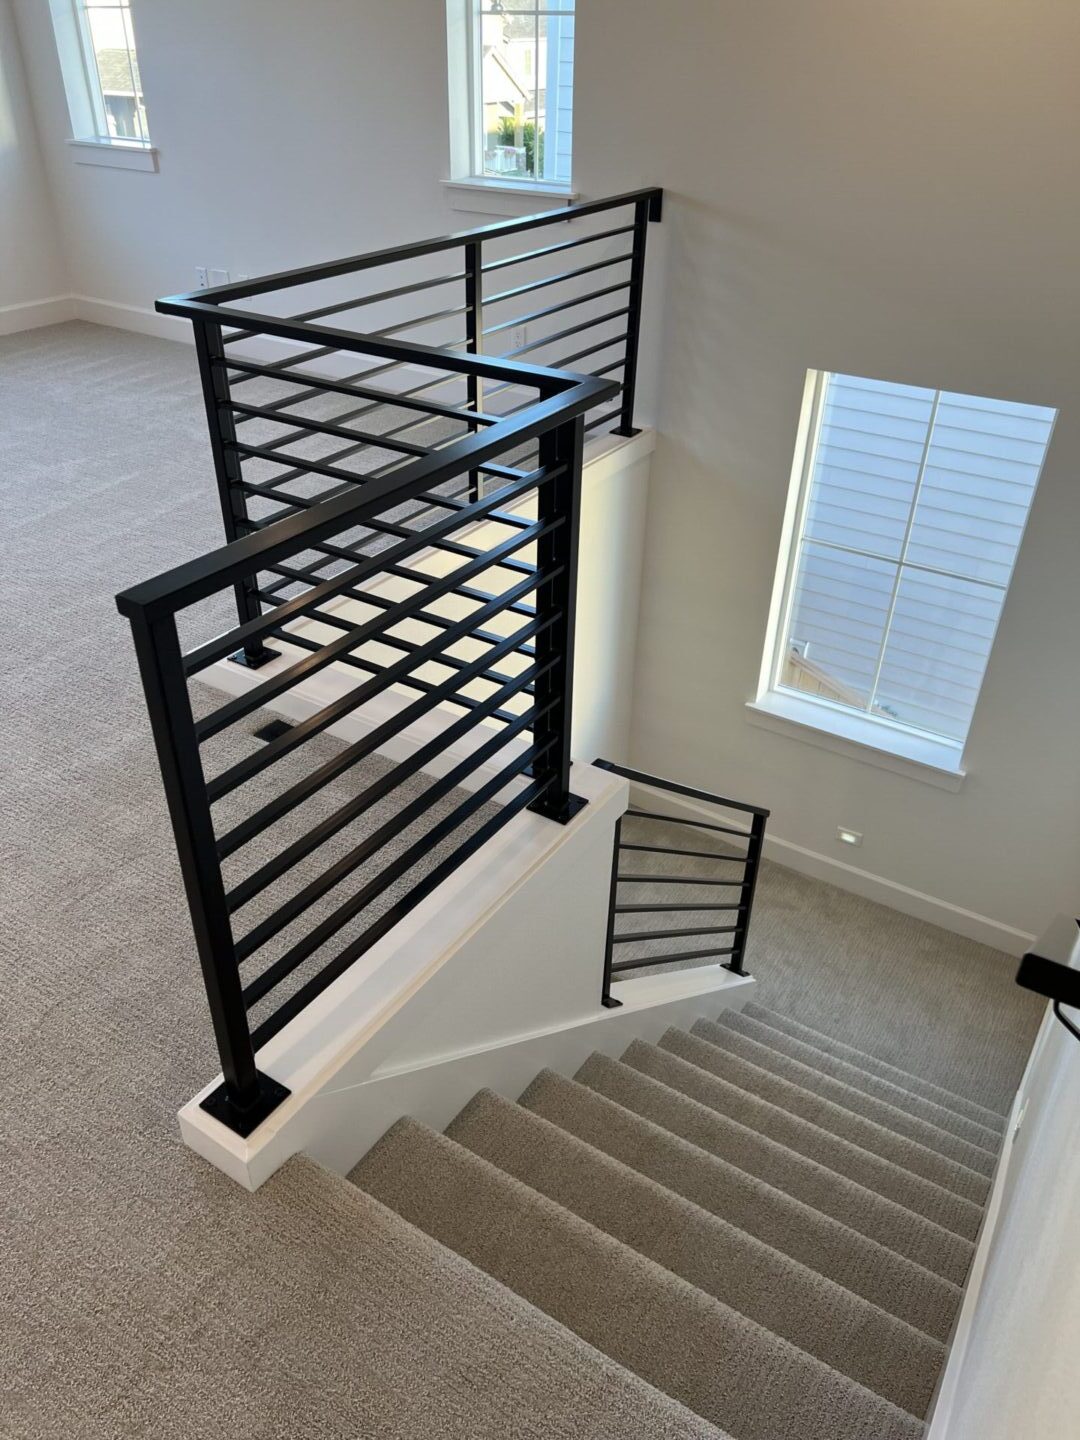 A black handrail with white molding.